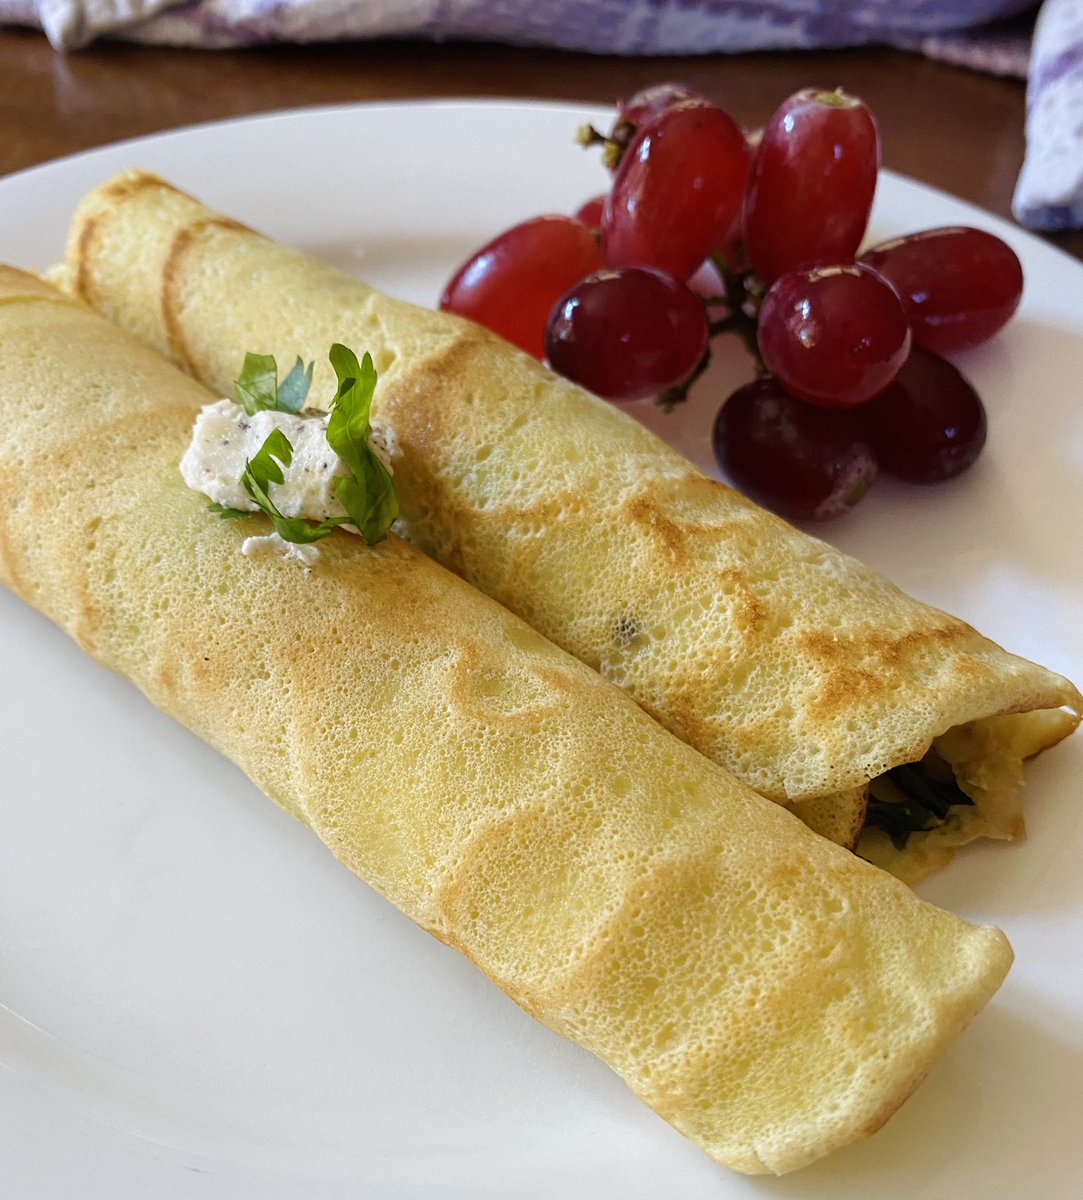 Savory pancakes filled with greens, cheese and chickpeas. 

#breakfast #Food #Savorypancakes #crepes #goatcheese